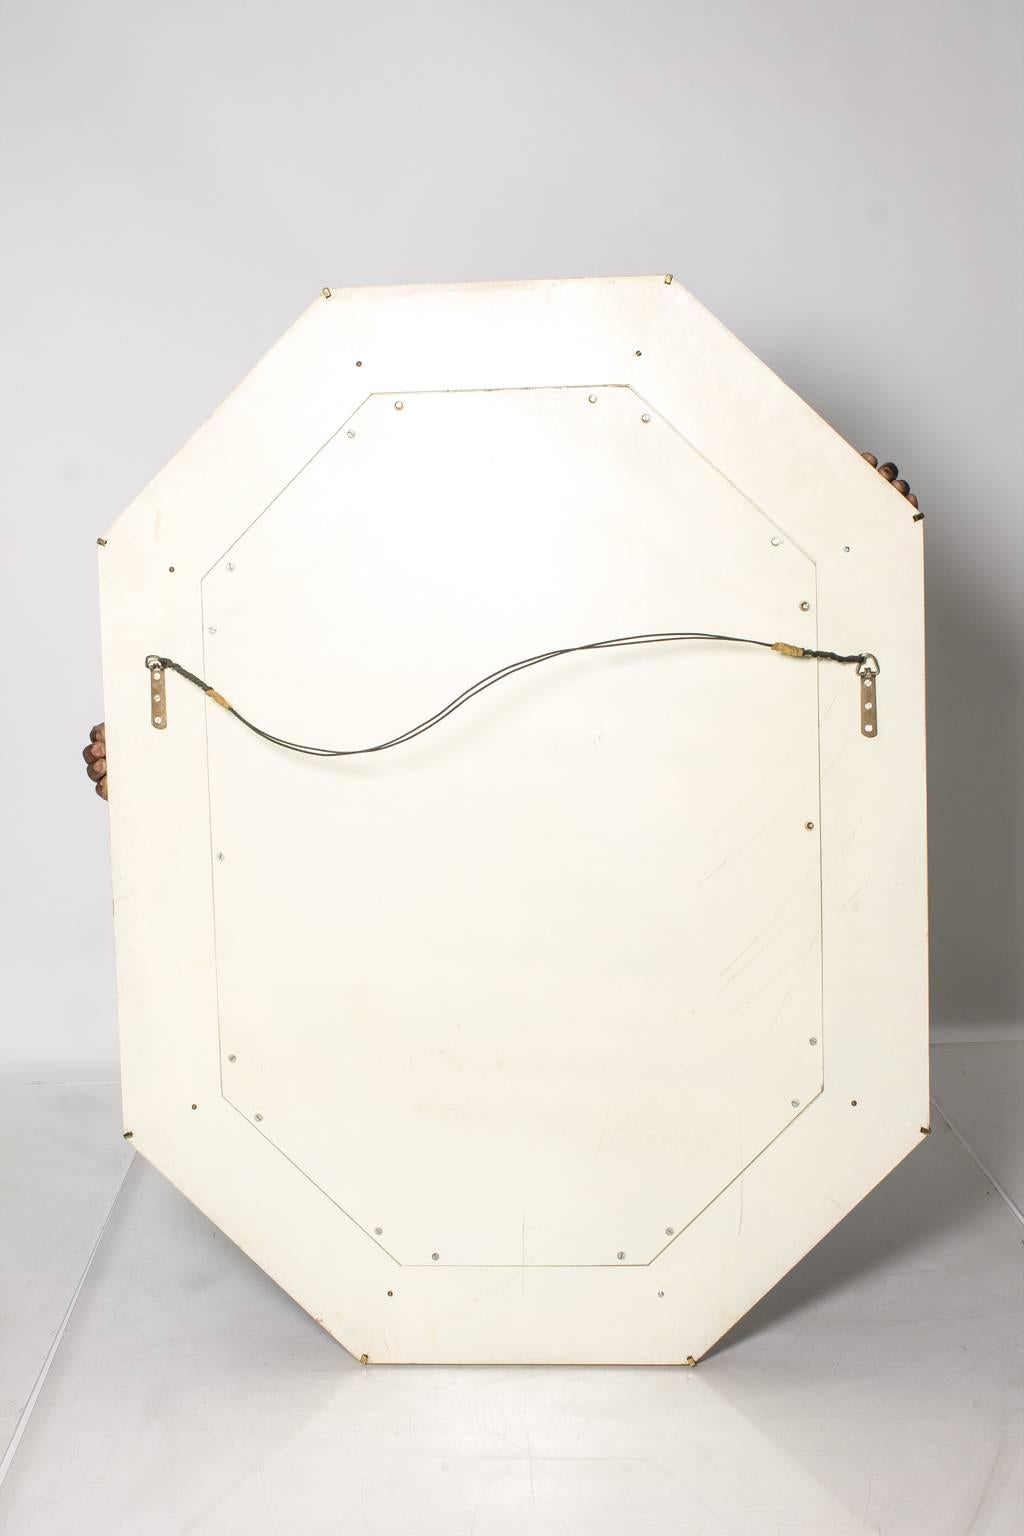 Octagonal wall mirror in the Karl Springer style with brass details.